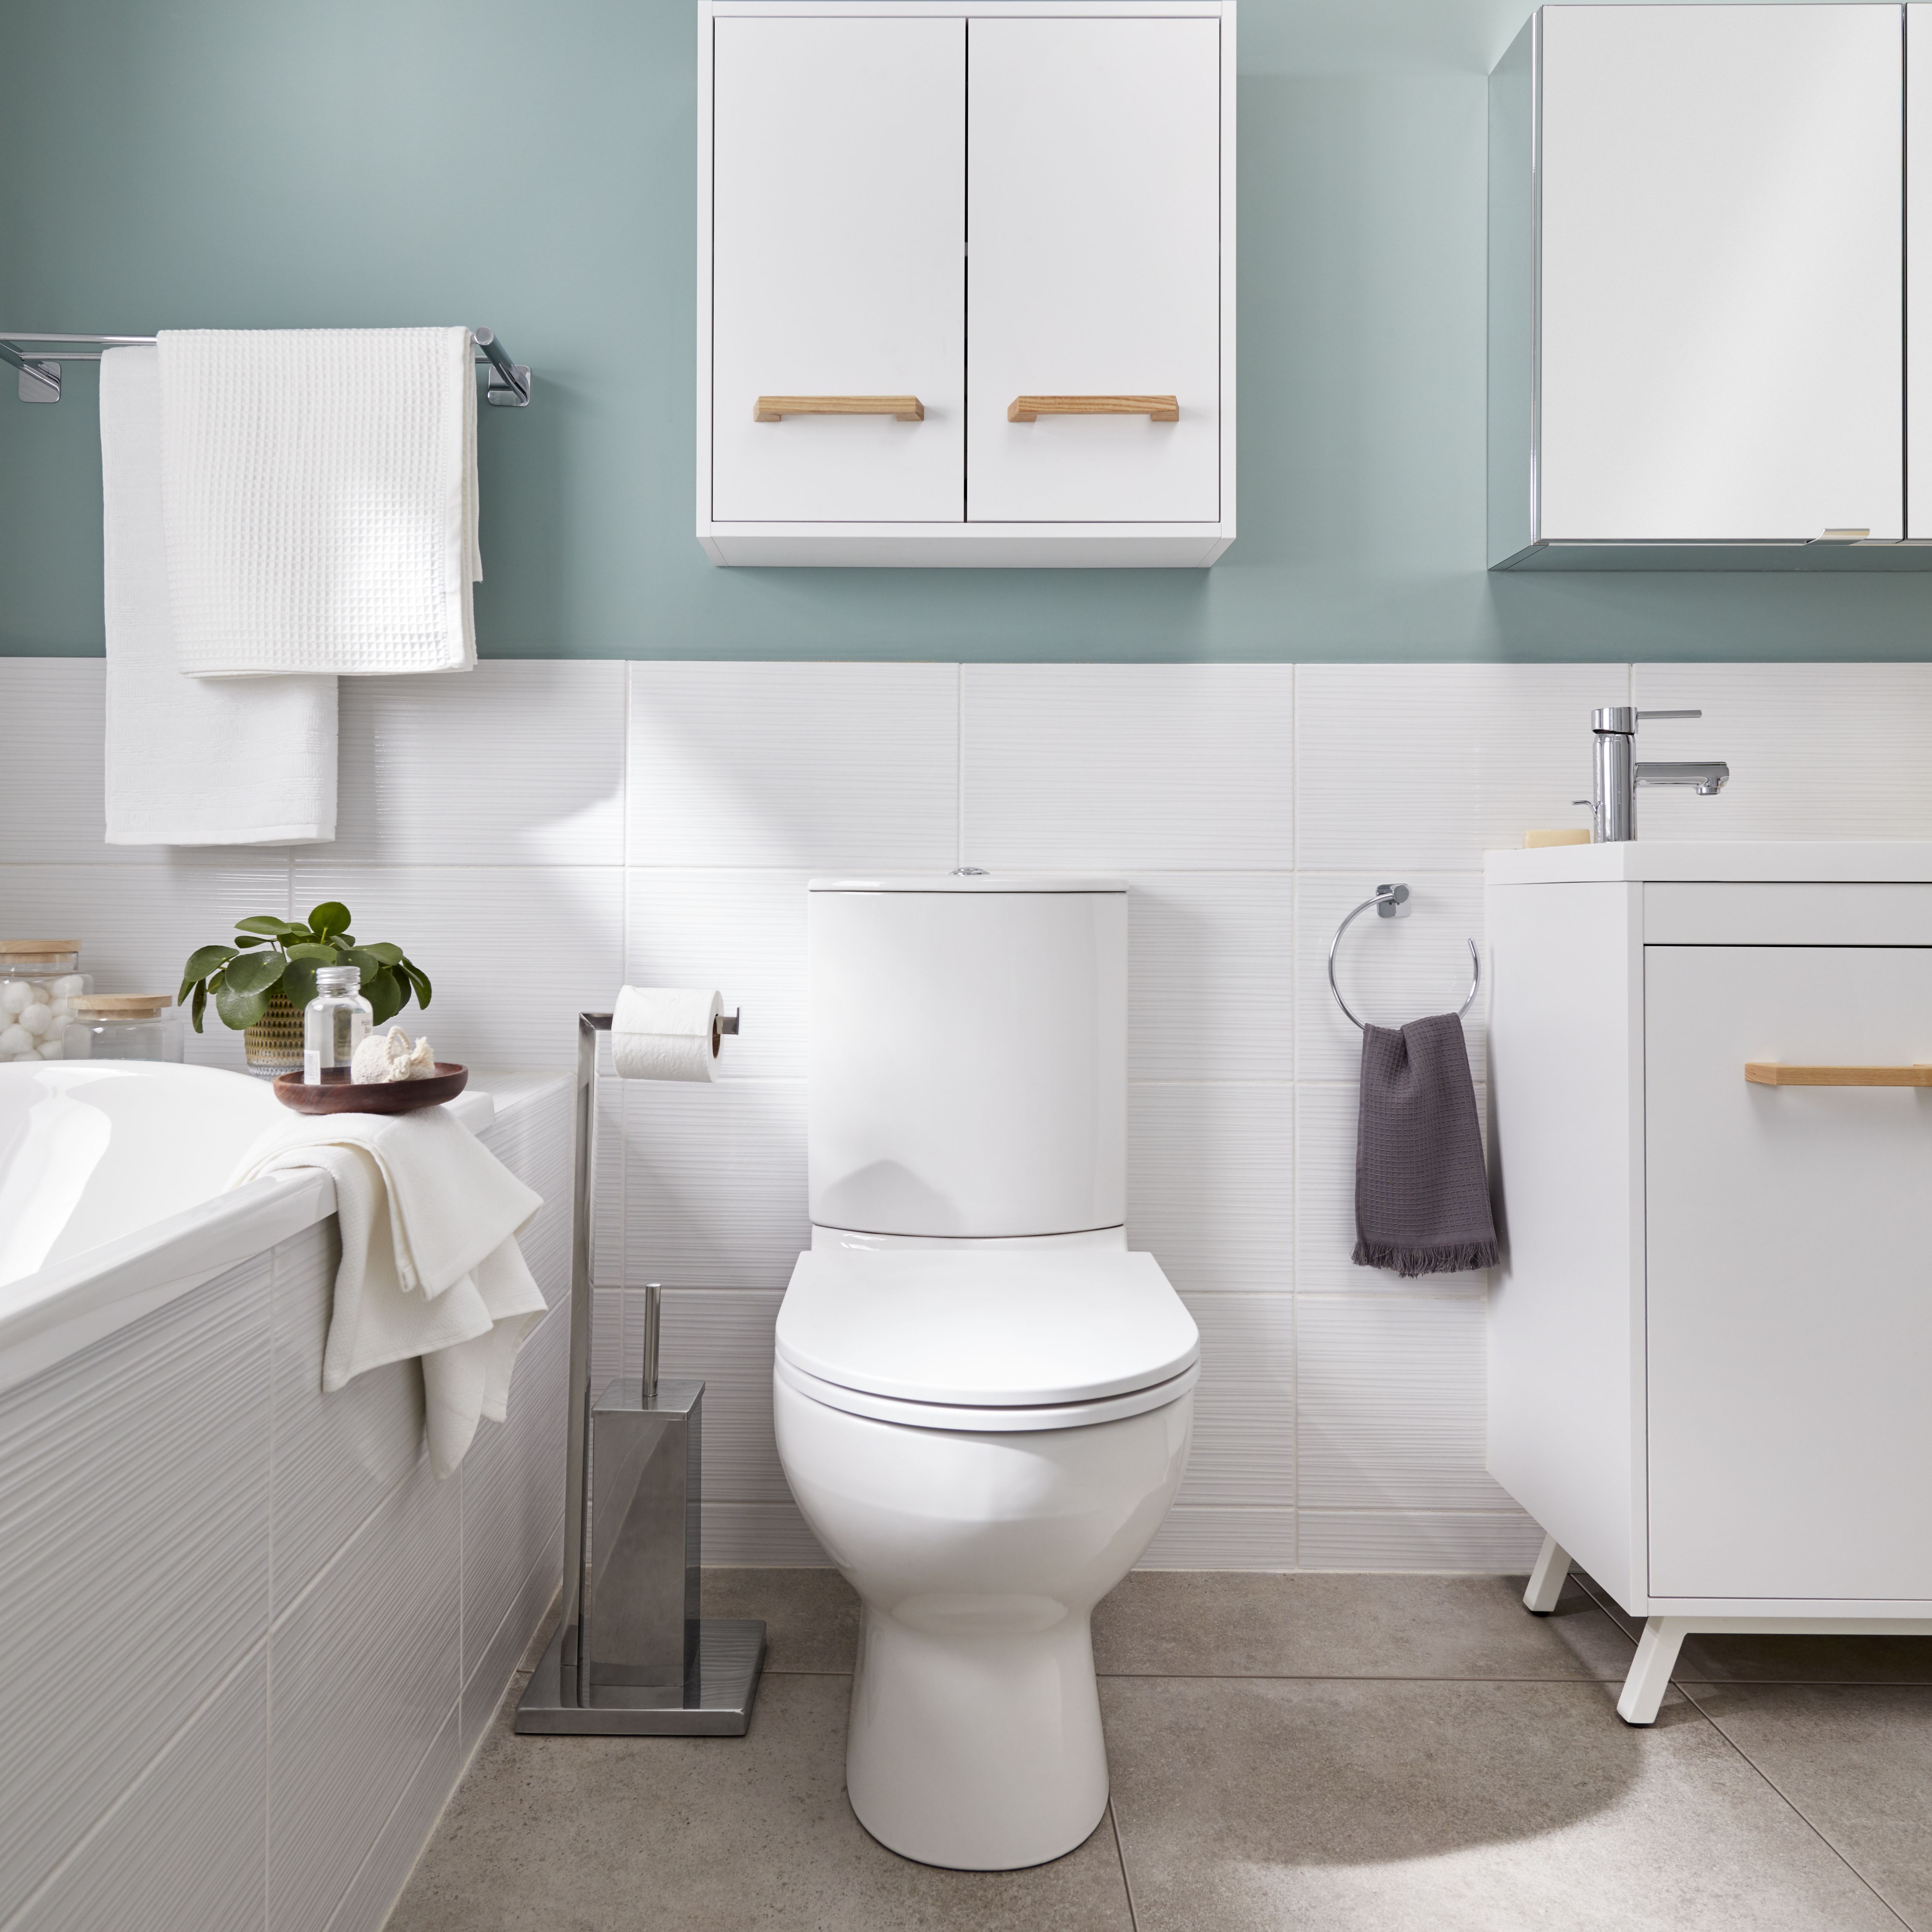 GoodHome Cavally White Close-coupled Floor-mounted Toilet & full pedestal basin (W)370mm (H)830mm